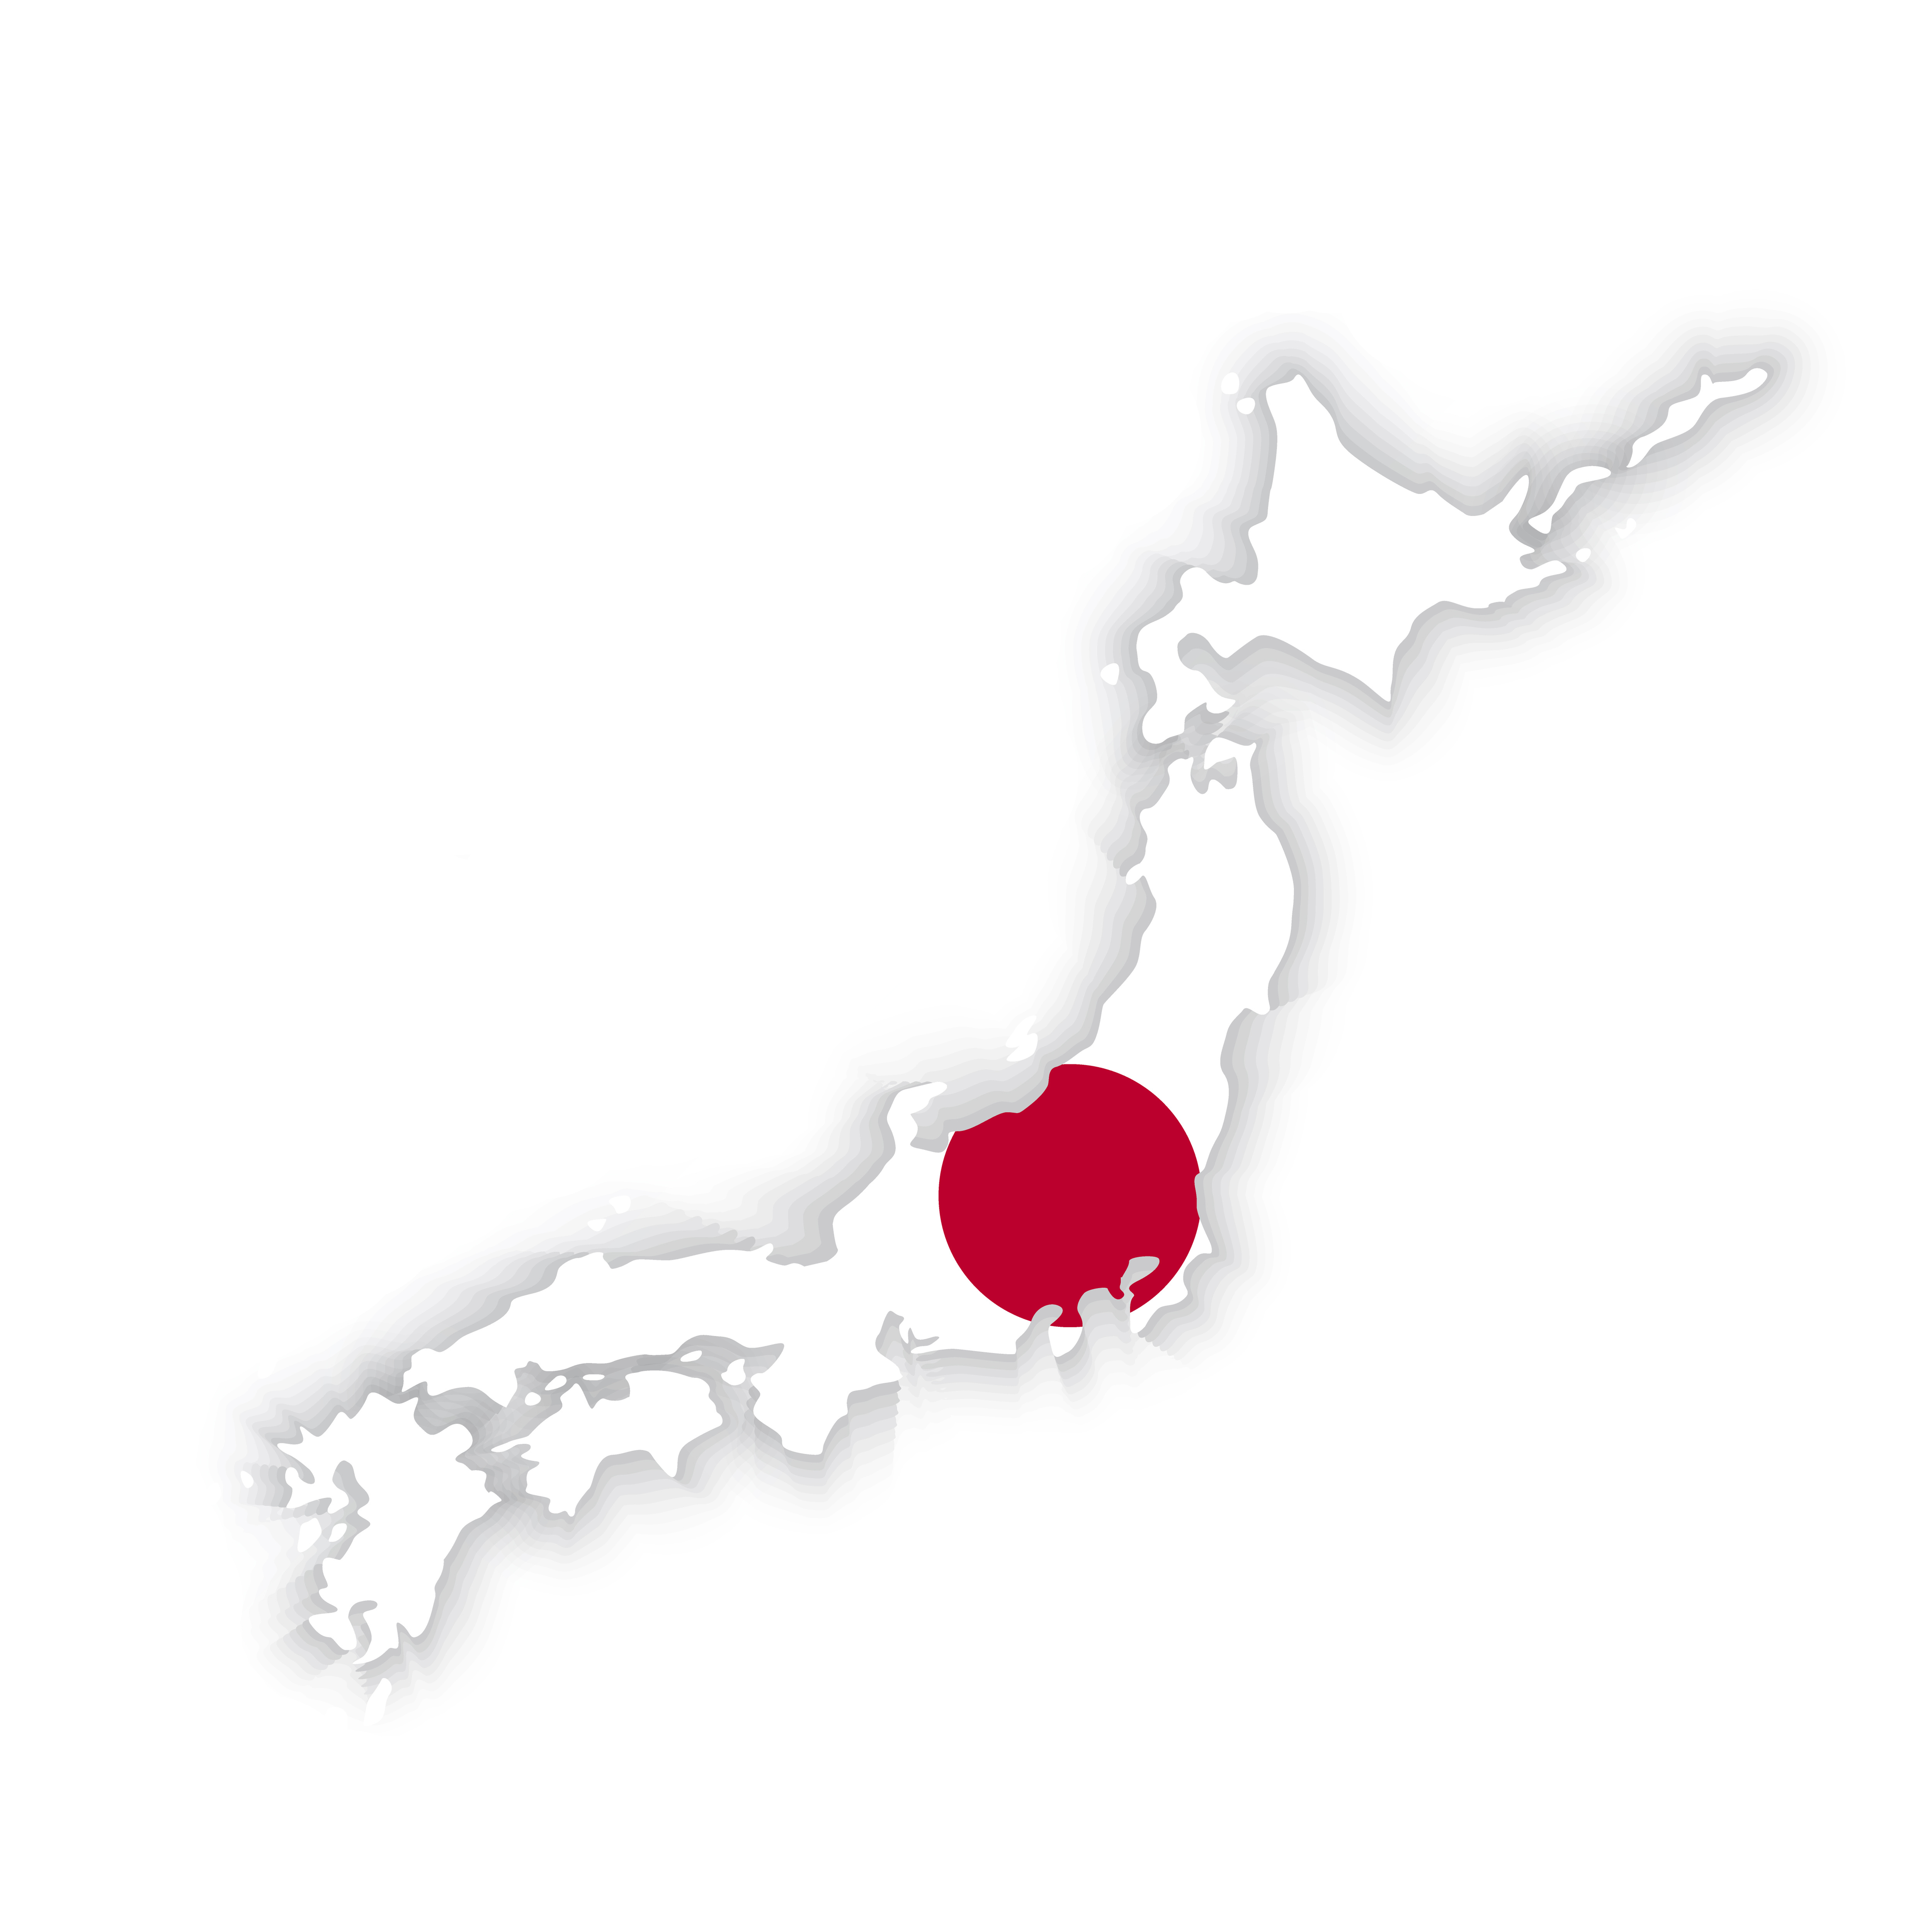 Map of Japan with flag overlay